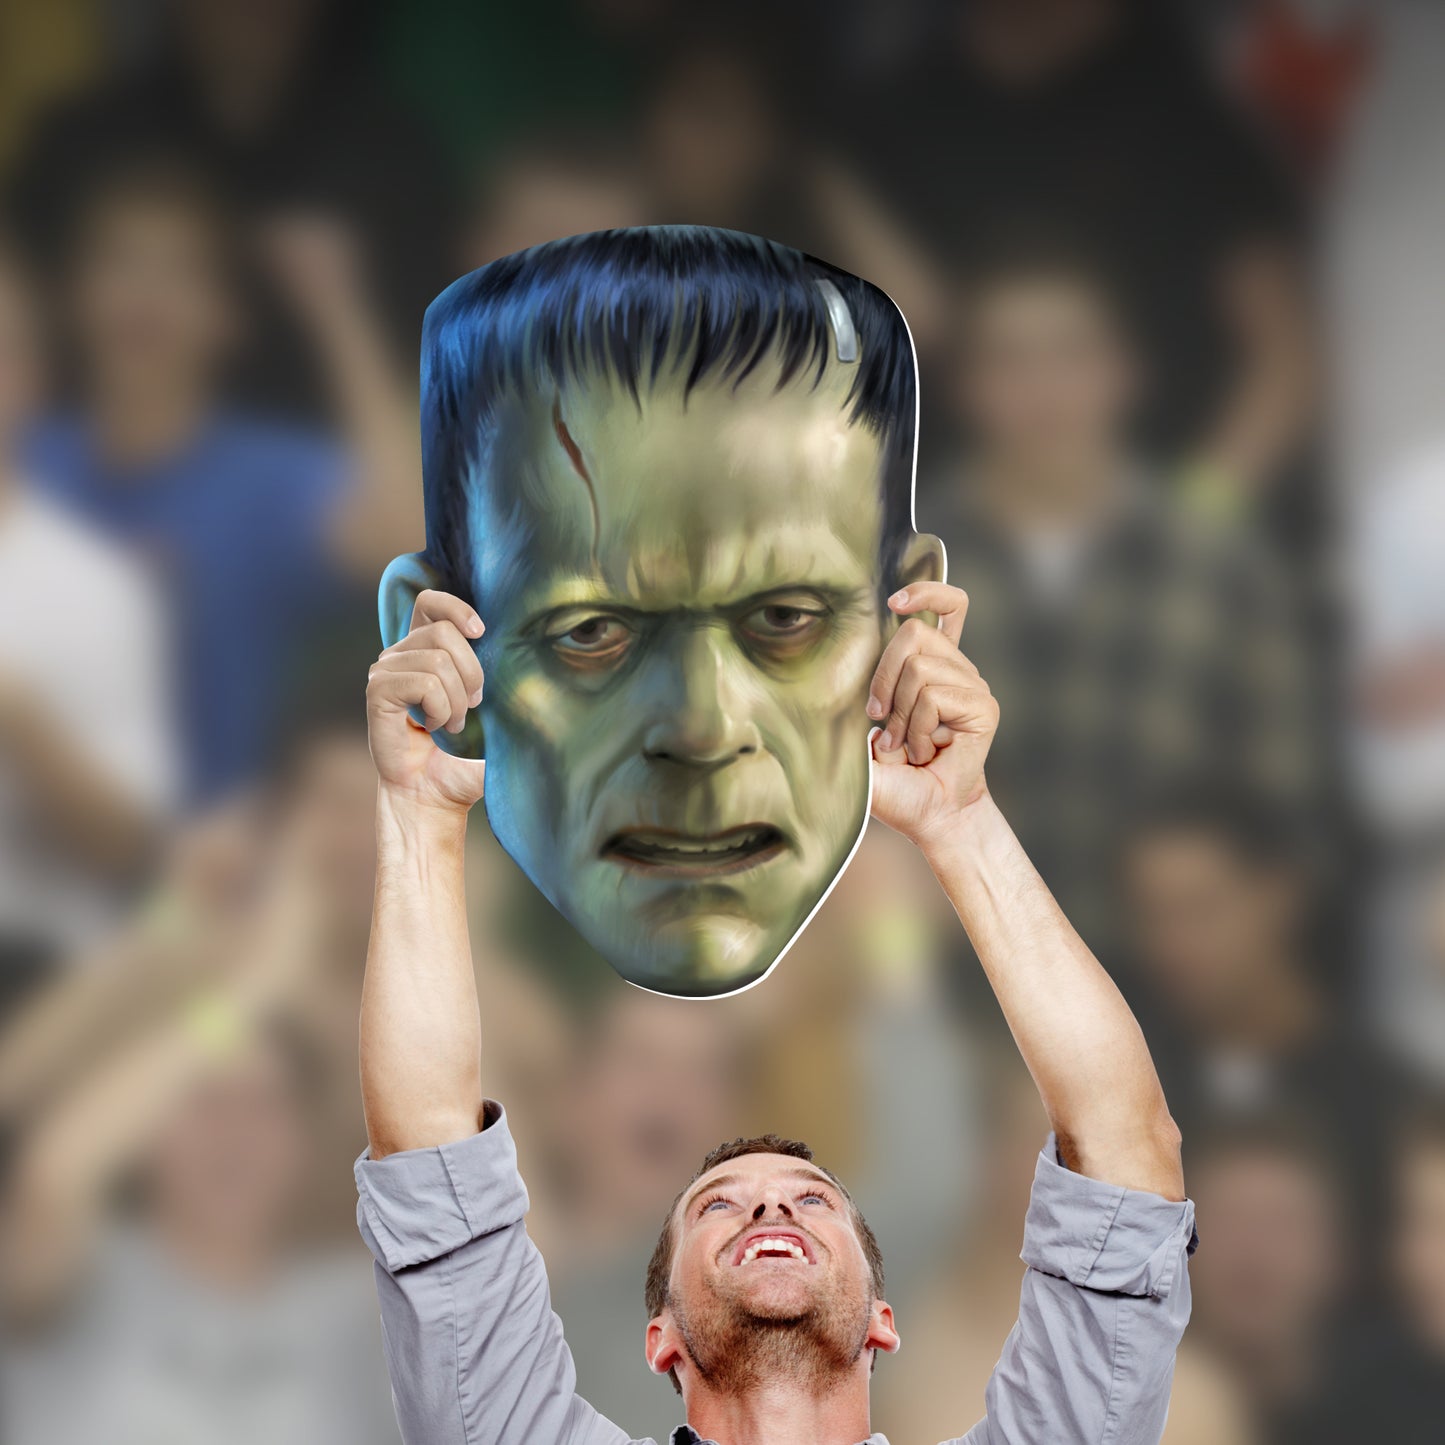 Universal Monsters: Frankenstein Animated   Foam Core Cutout  - Officially Licensed NBC Universal    Big Head